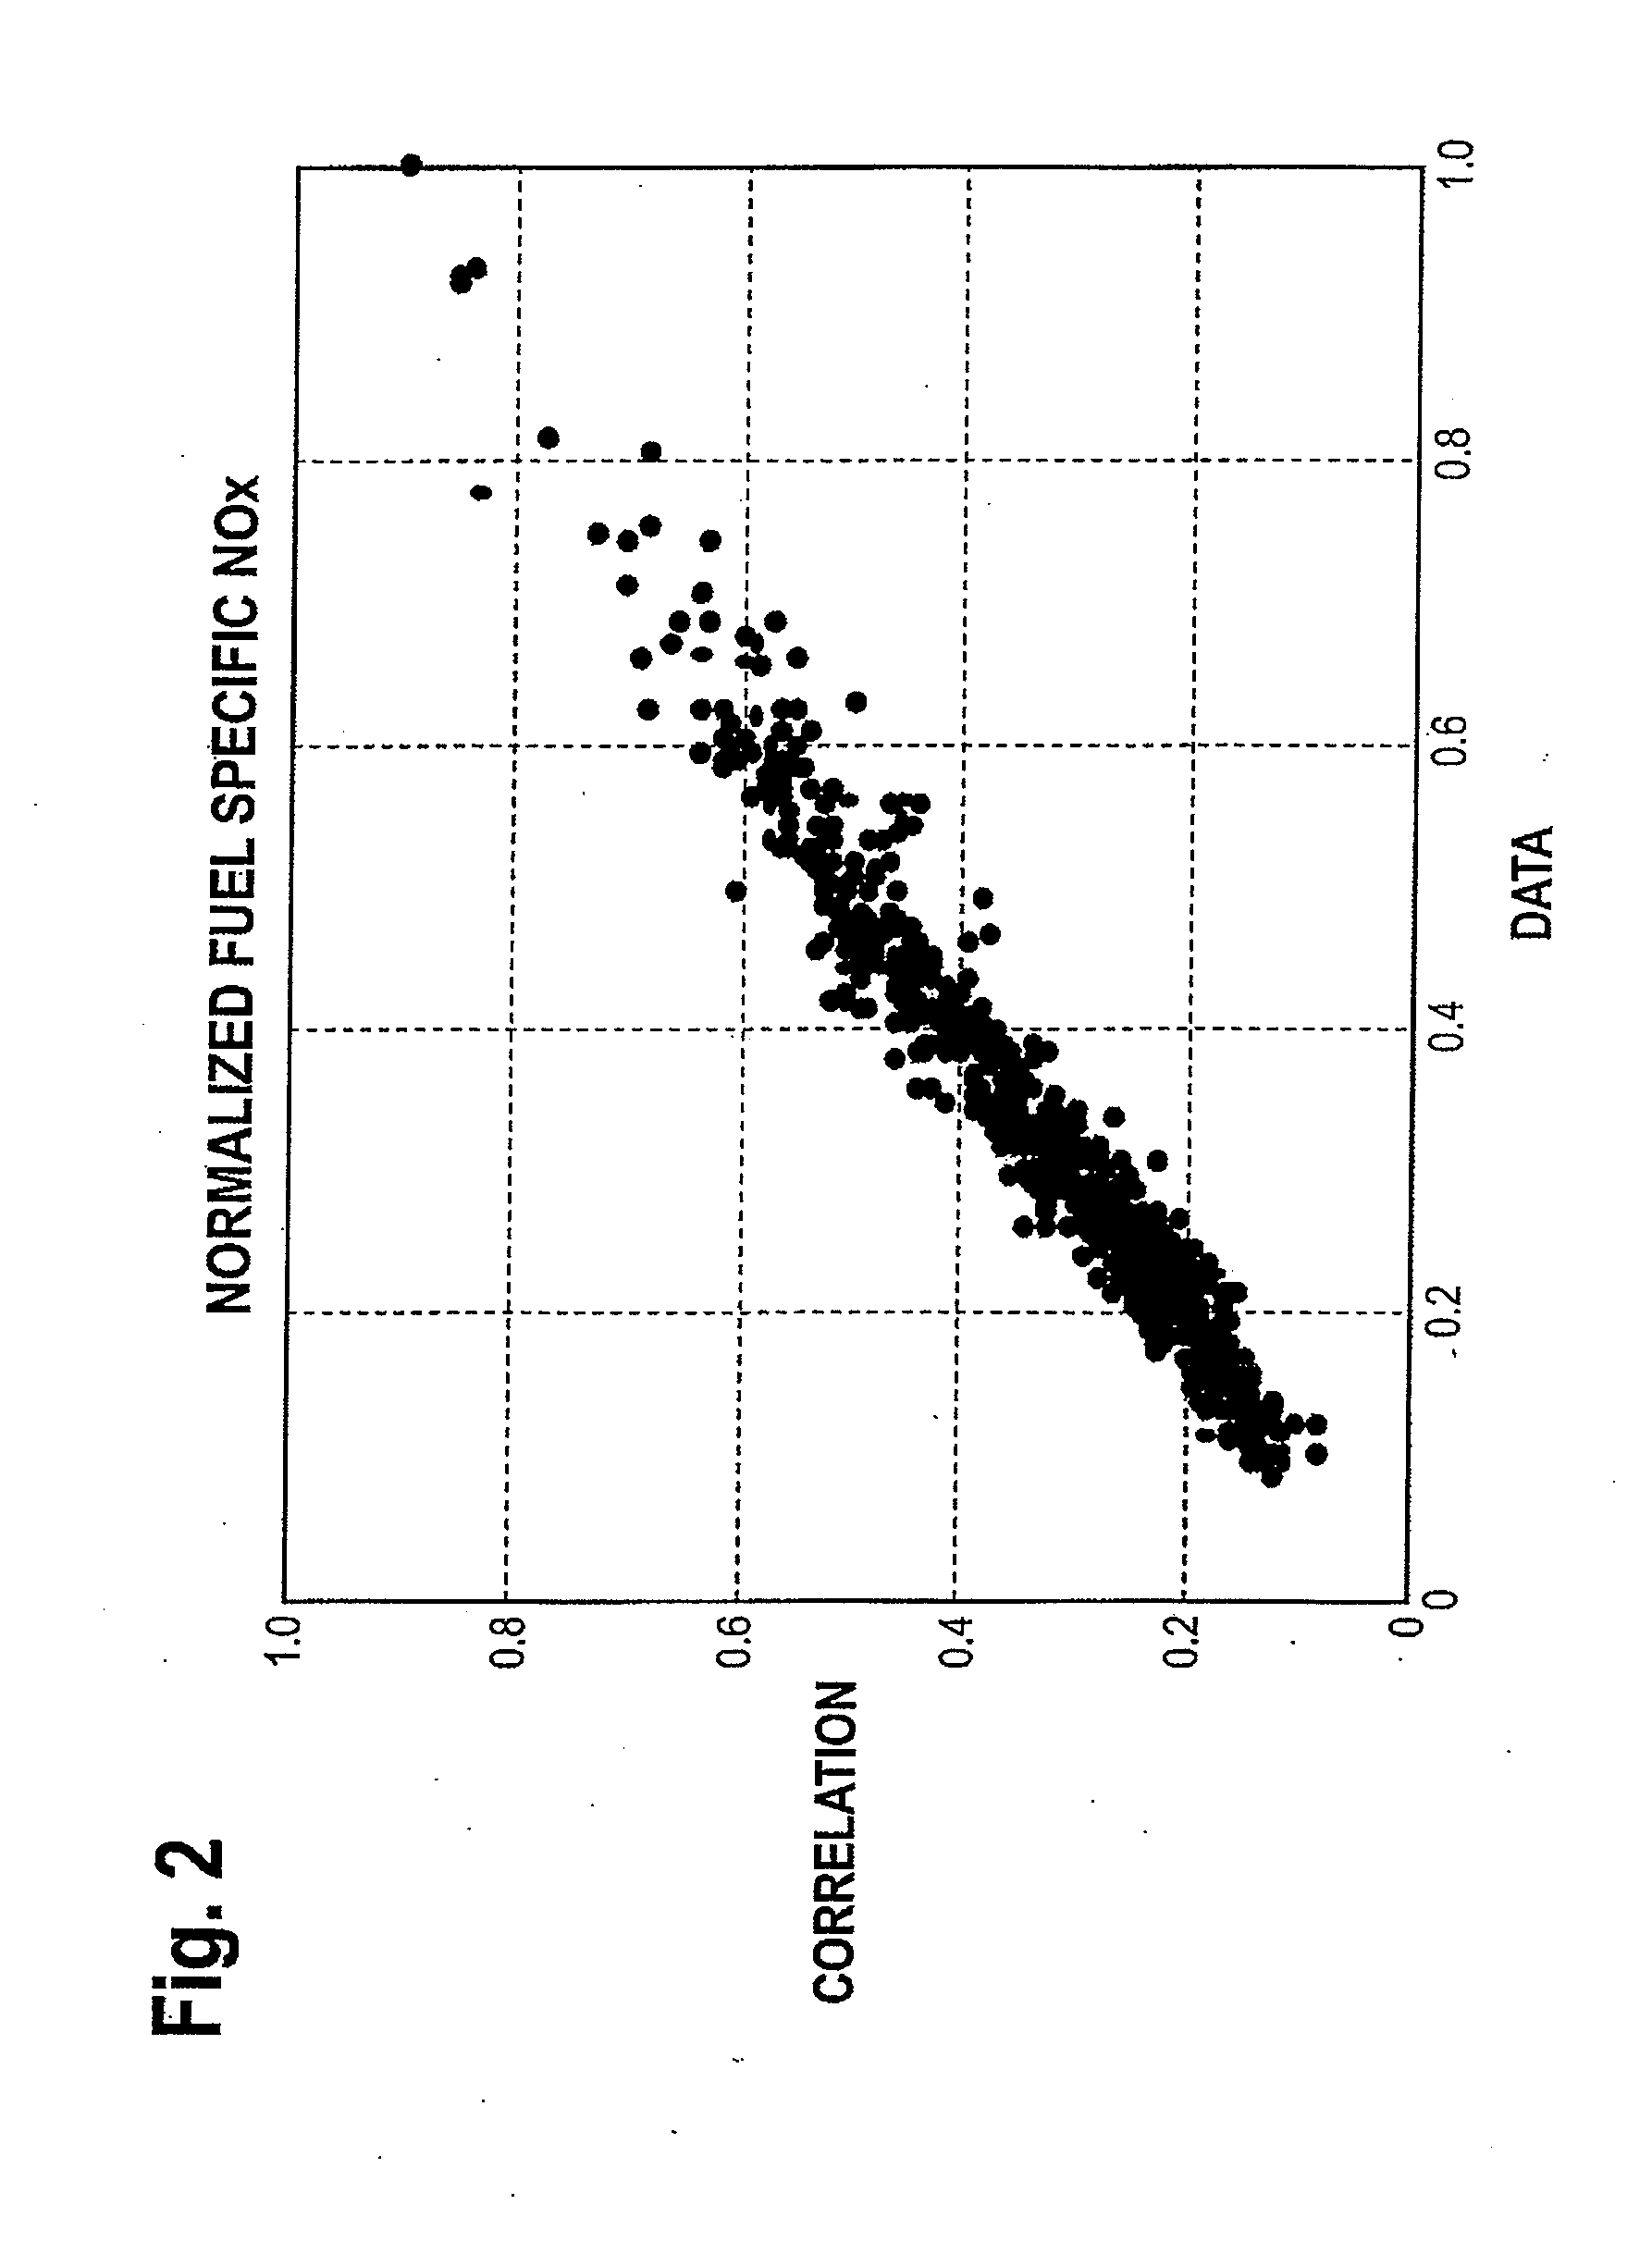 Composition and Method for Reducing NOx and Smoke Emissions From Diesel Engines at Minimum Fuel Consumption